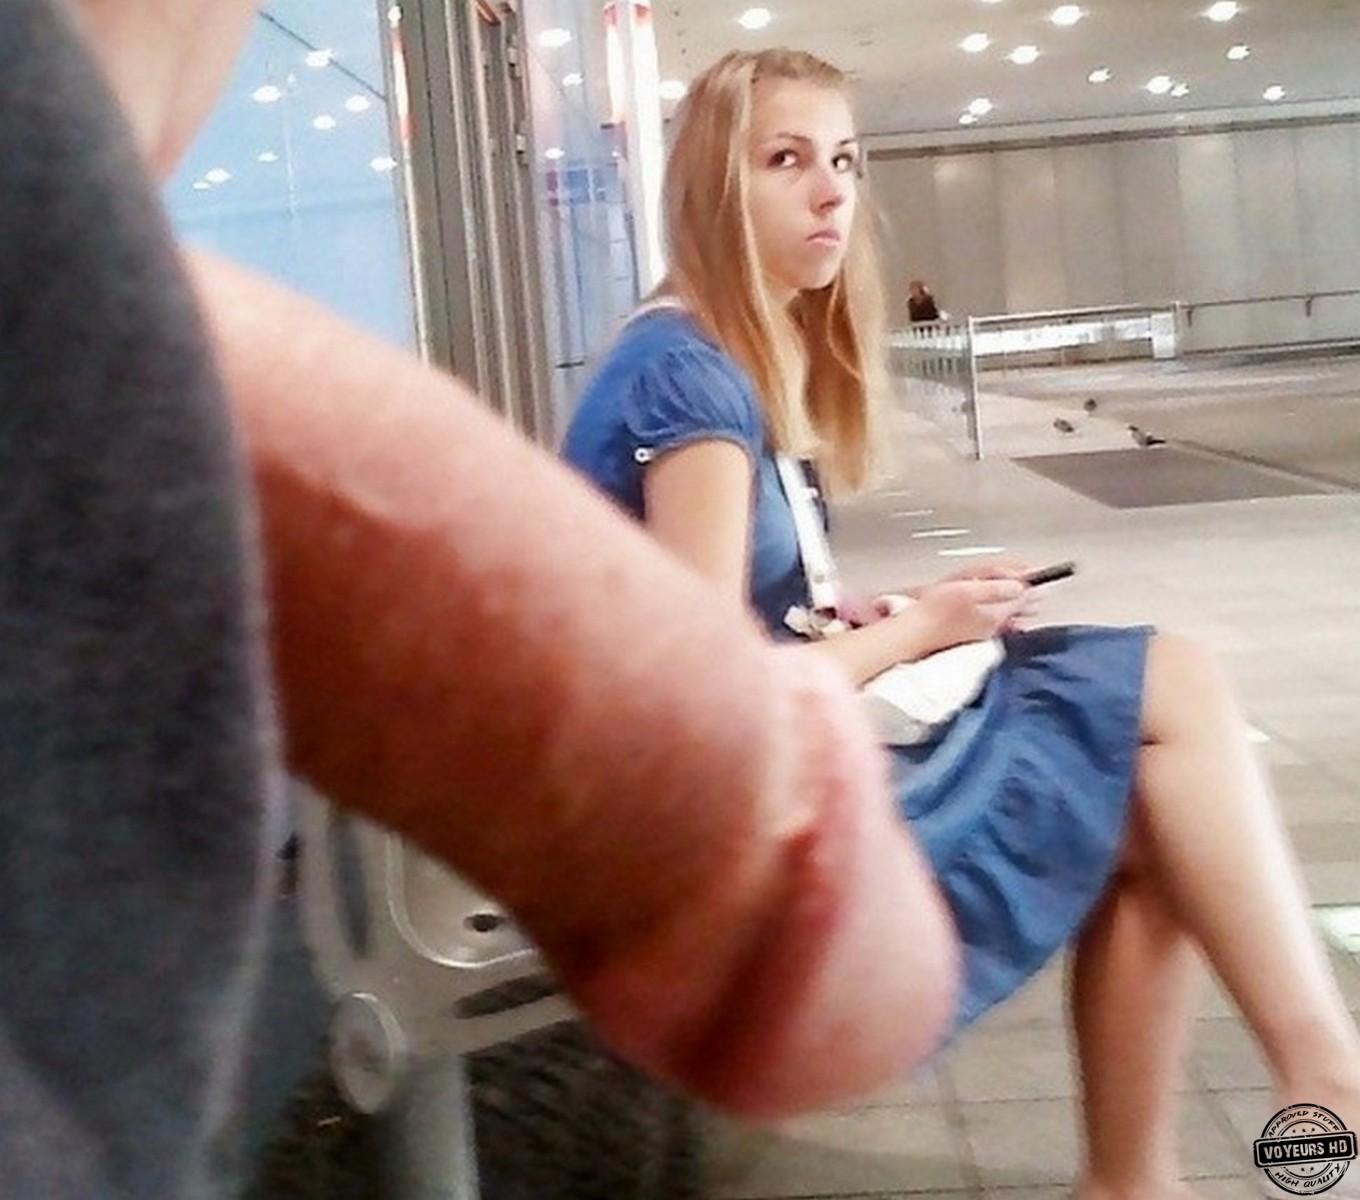 Woman shocked by my hard dick flash in public